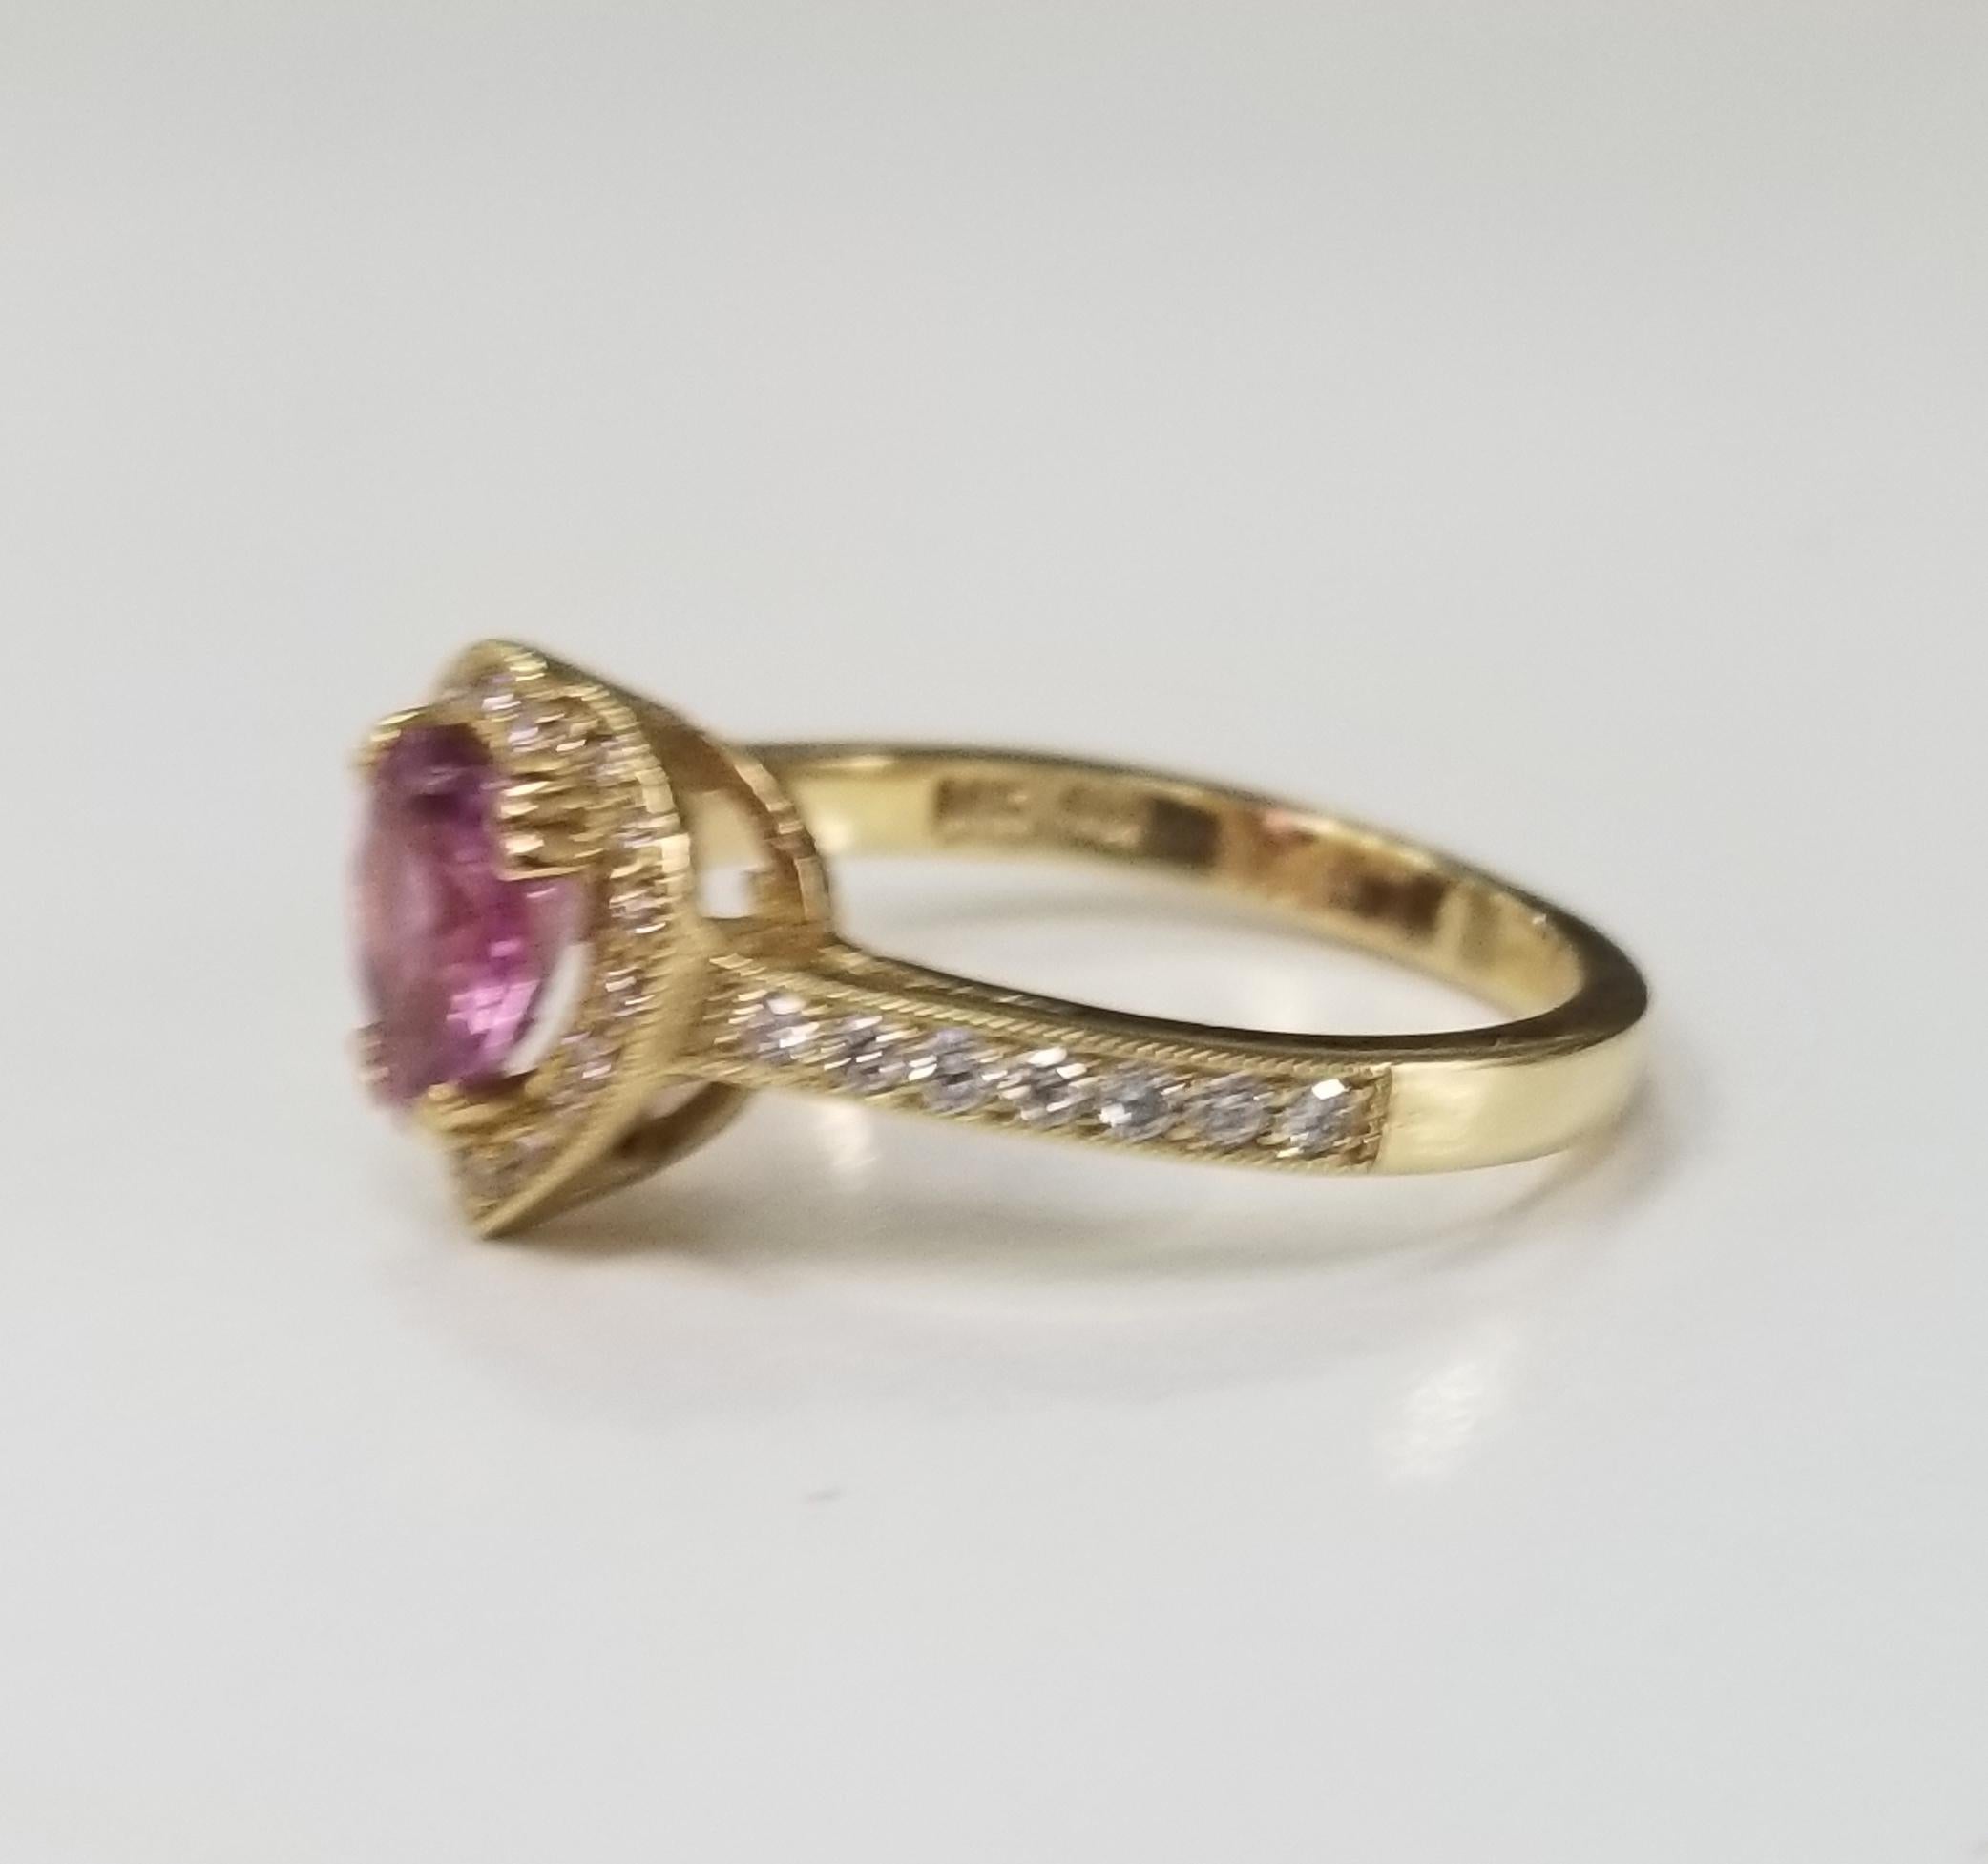 14k yellow gold pink sapphire and diamond ring, containing 1 heart shape cut pink sapphire of gem quality weighing 1.40cts. and 33 round full cut diamonds of very fine quality weighing .25pts.  This ring is a size 7 but we will size to fit for free.